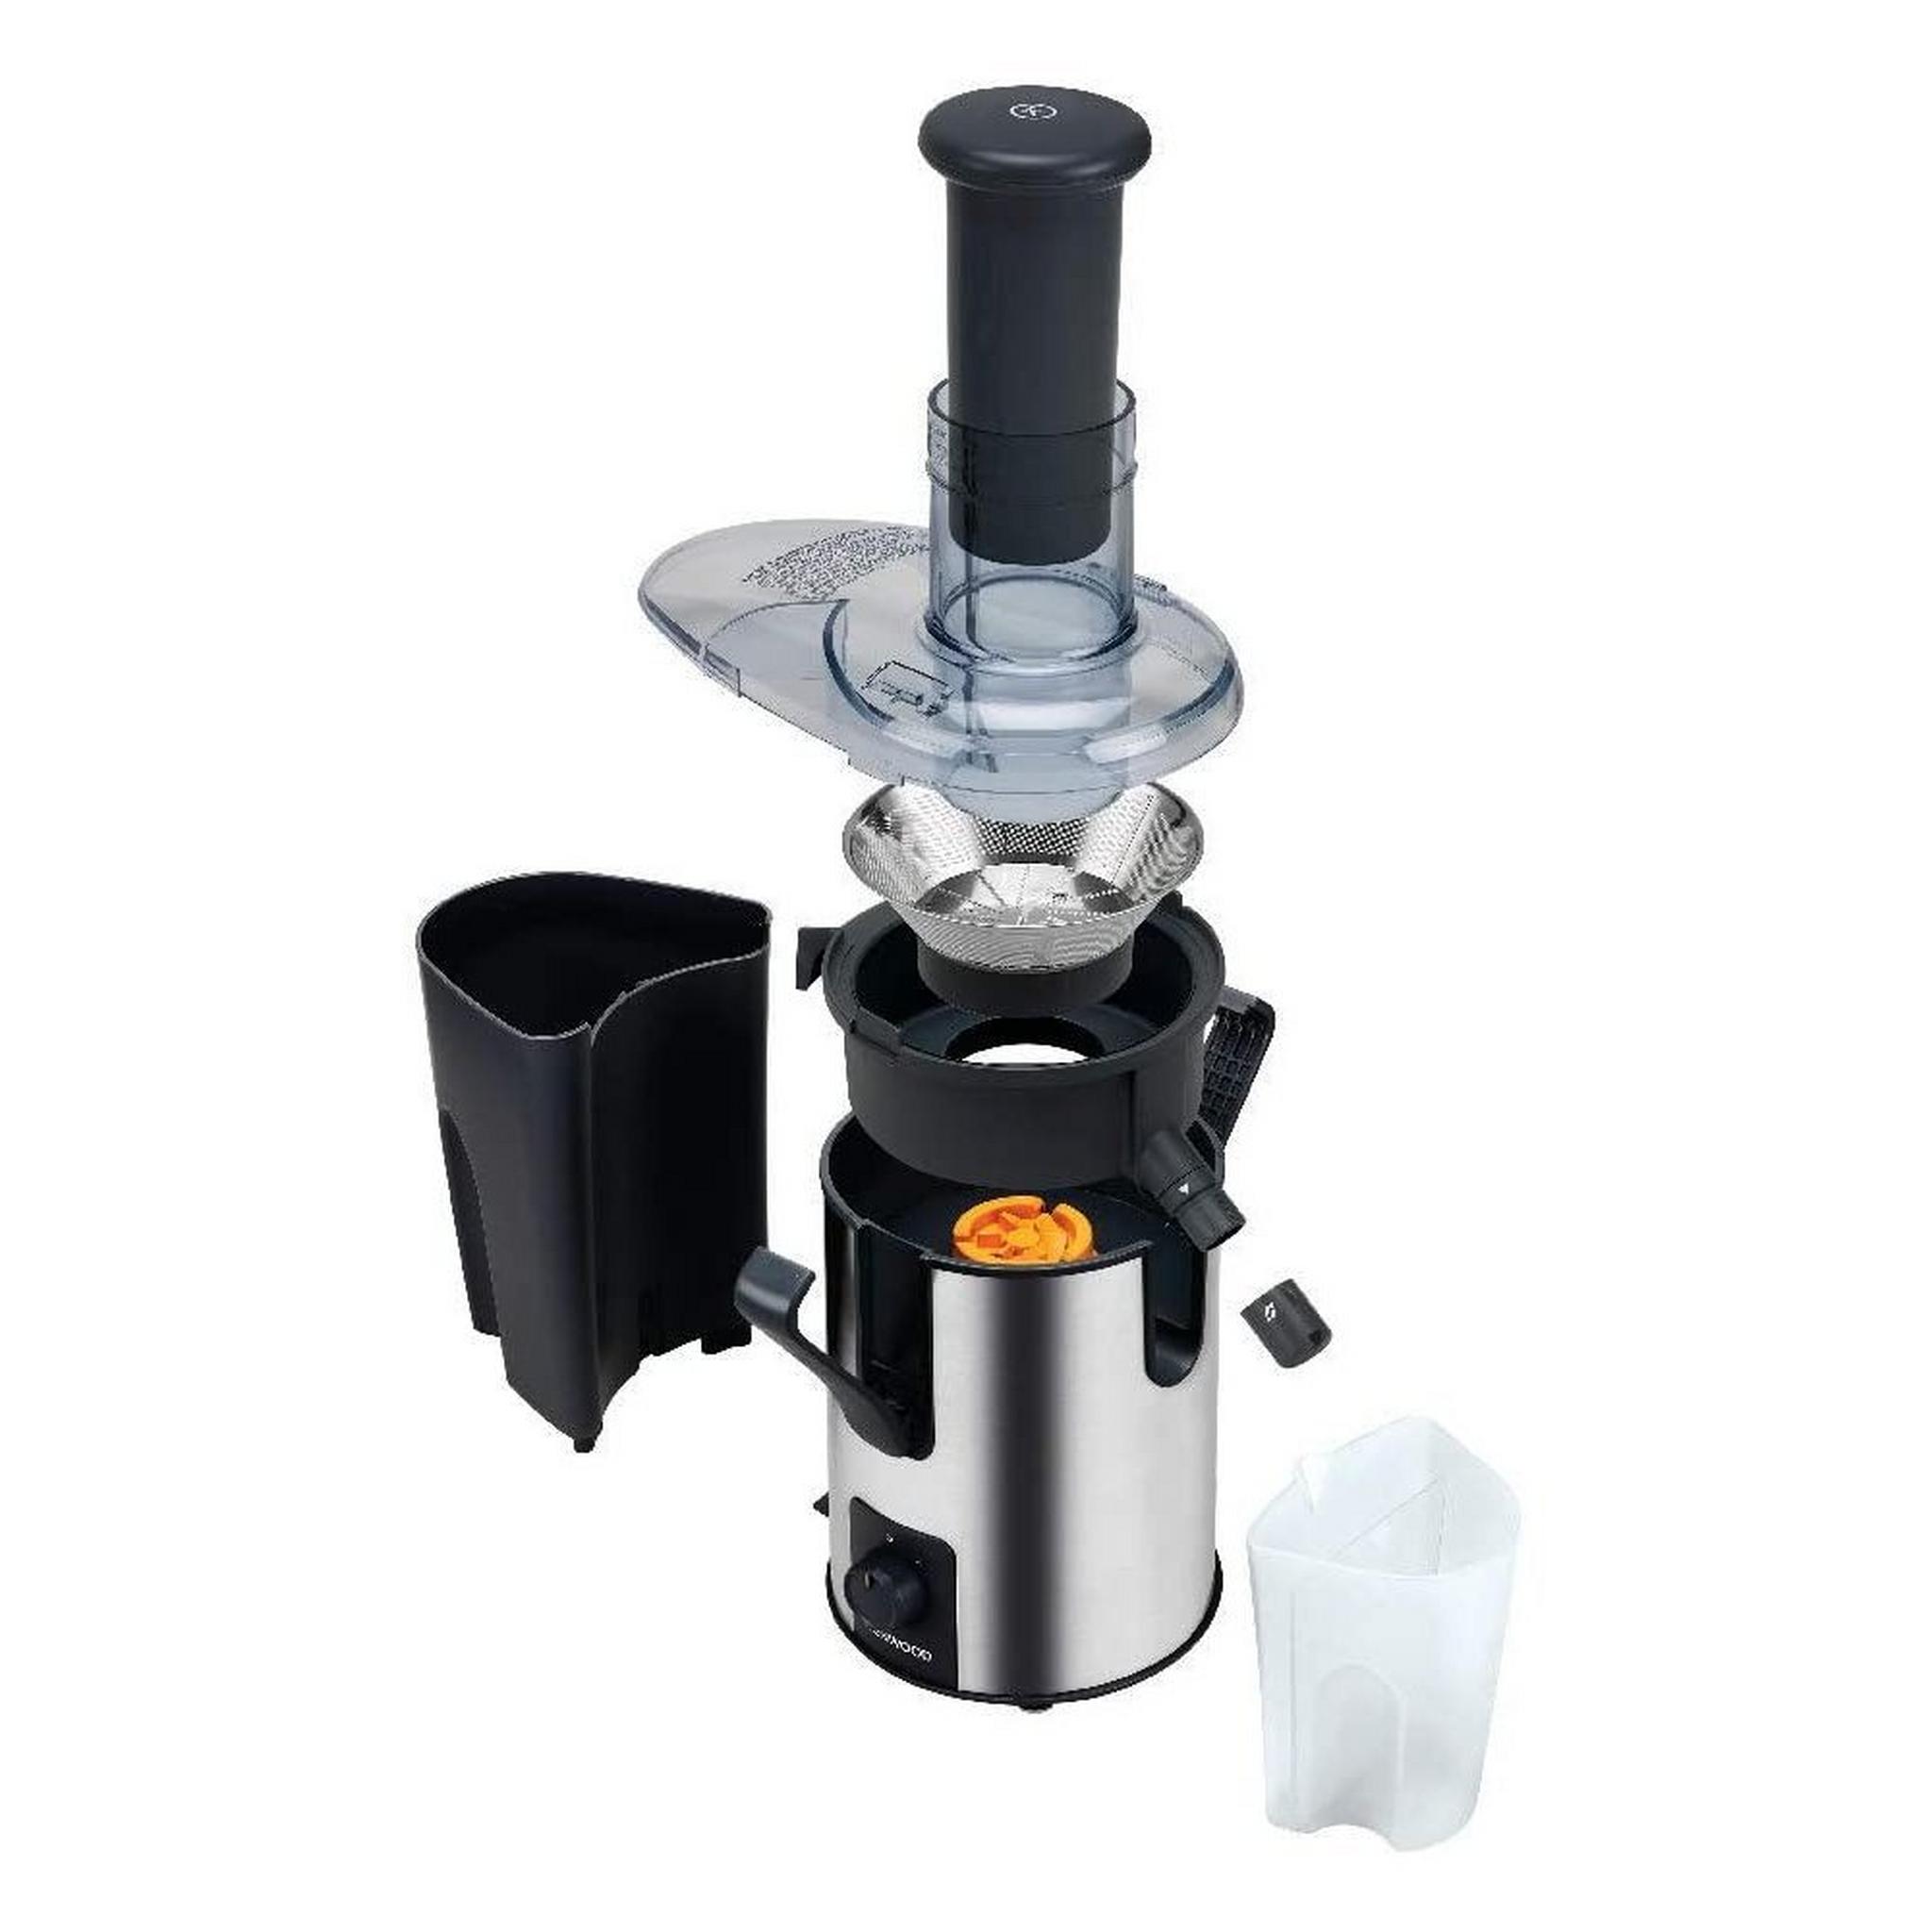 Kenwood Stainless Steel Juicer Extractor, 700W- Silver, EM50.000BS - Stainless Steel